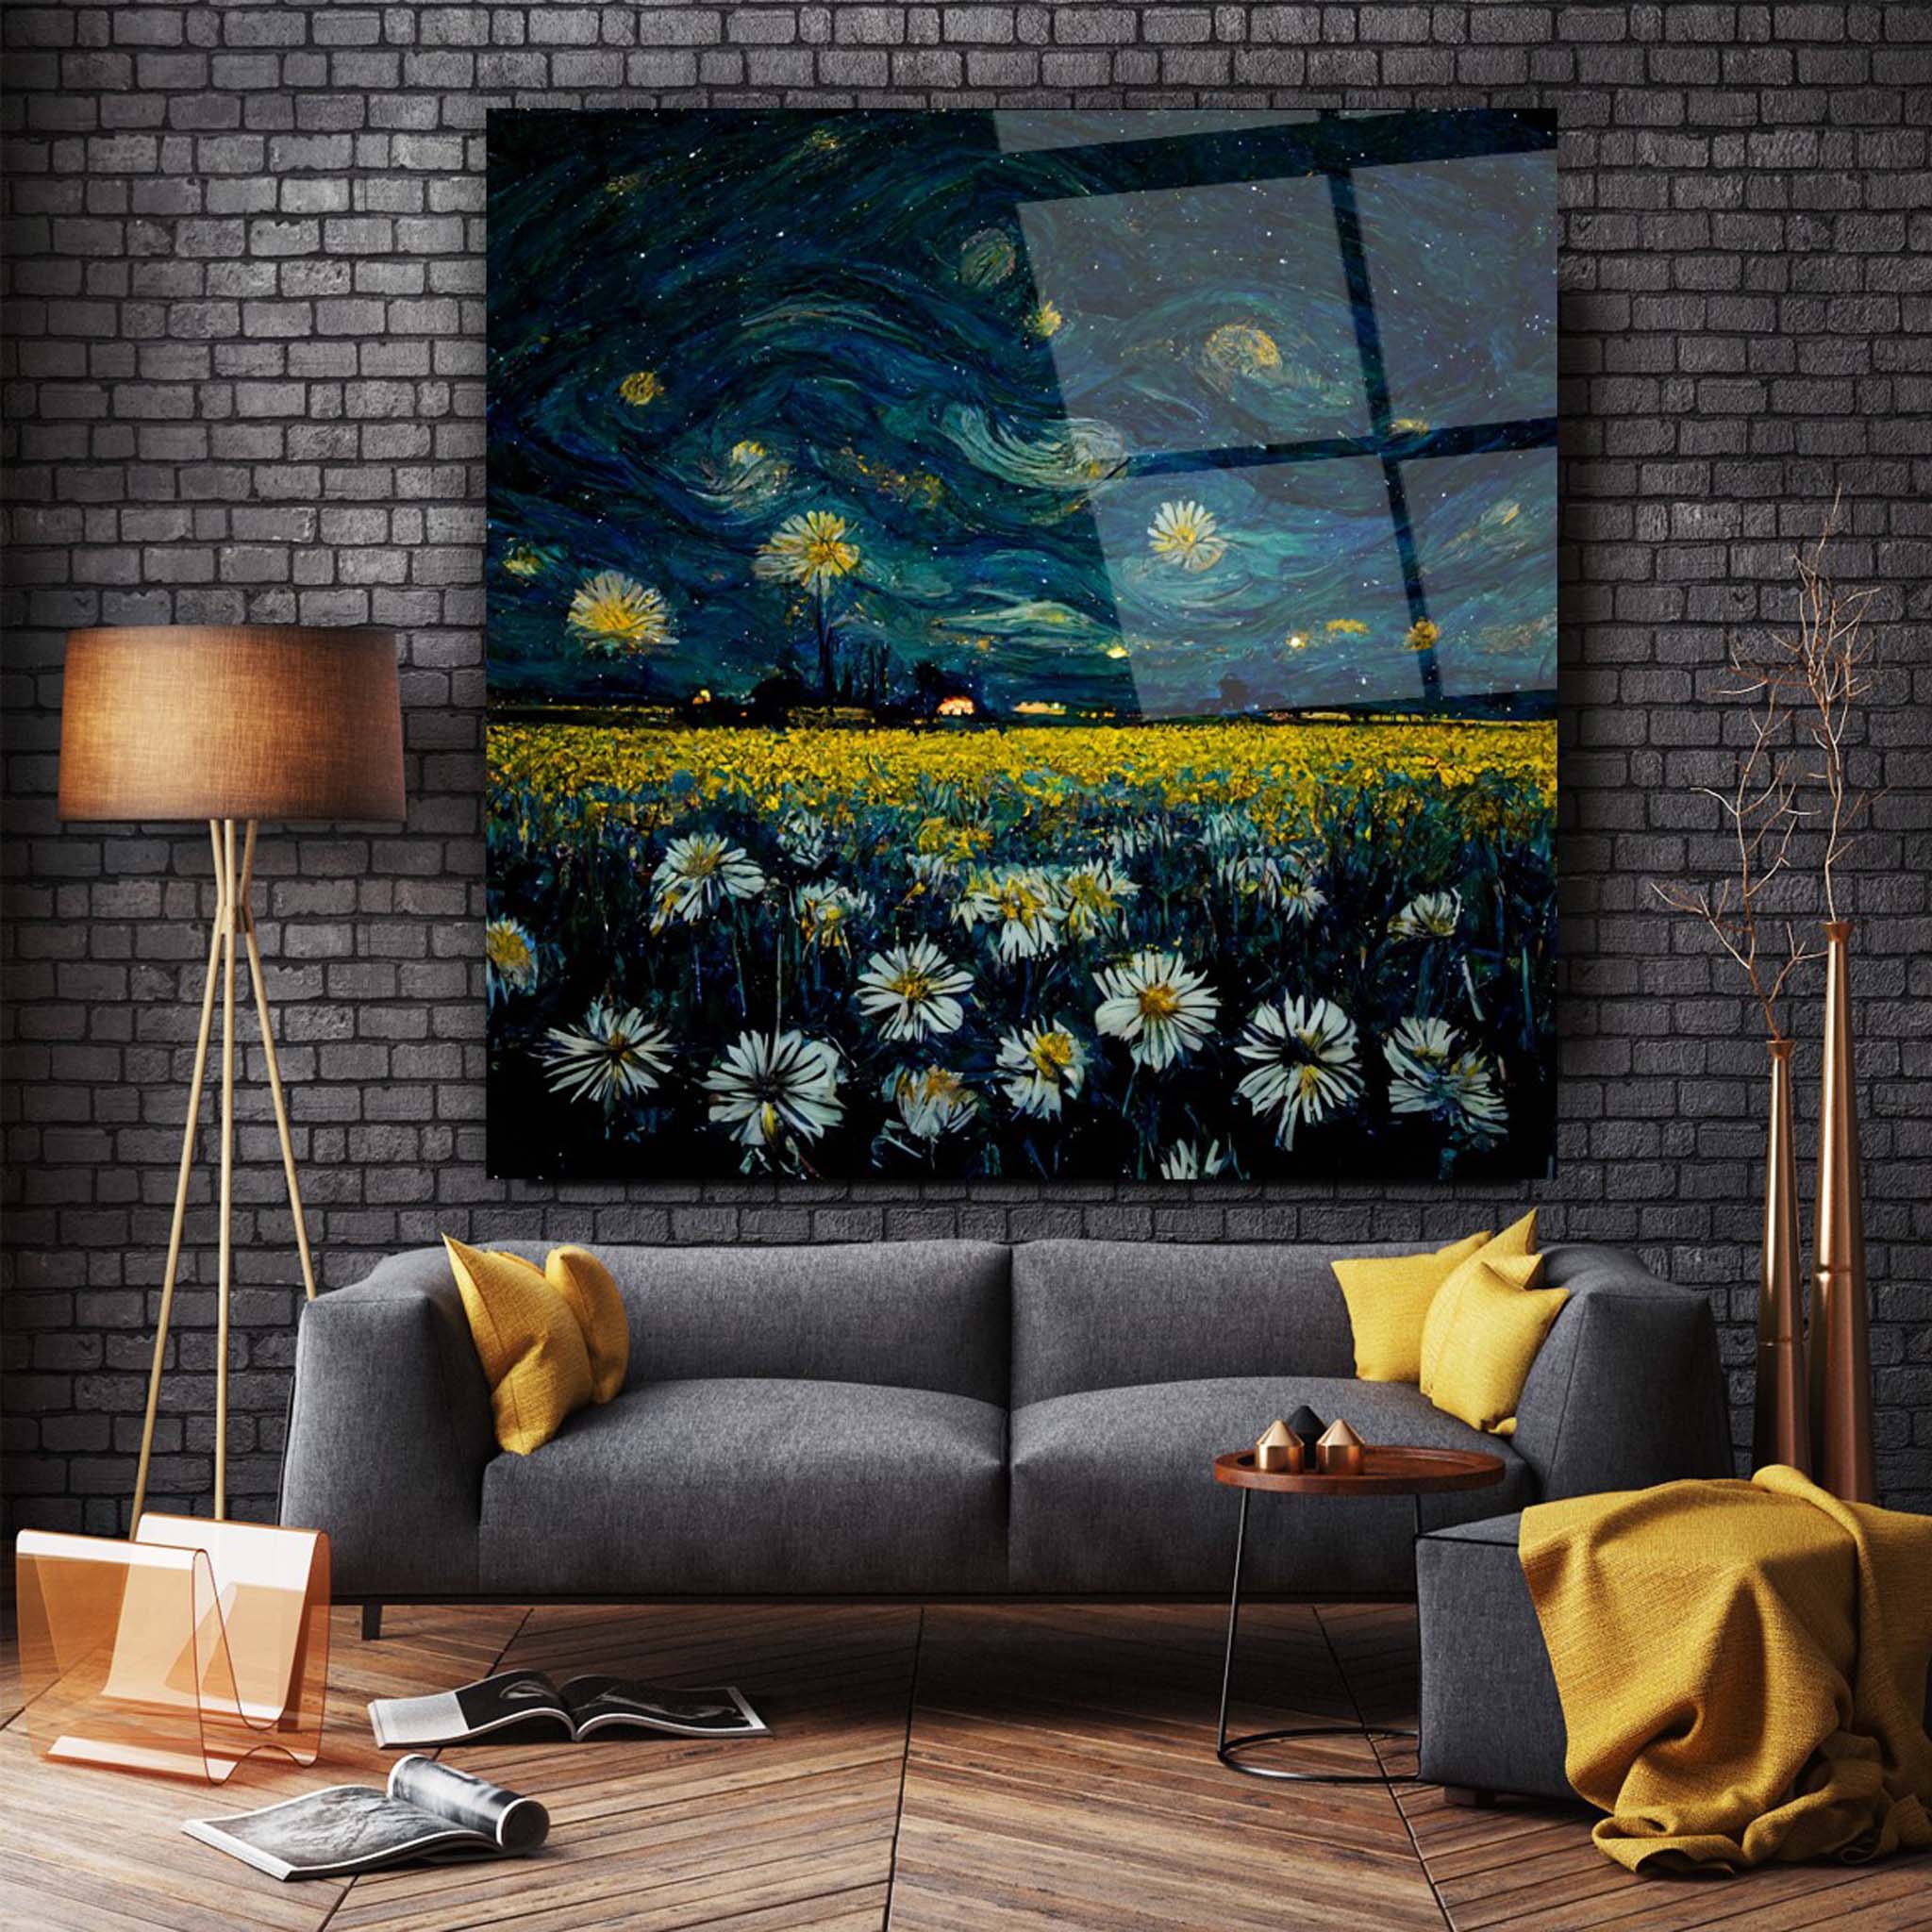 Starry Night and Flowers Glass Wall Art